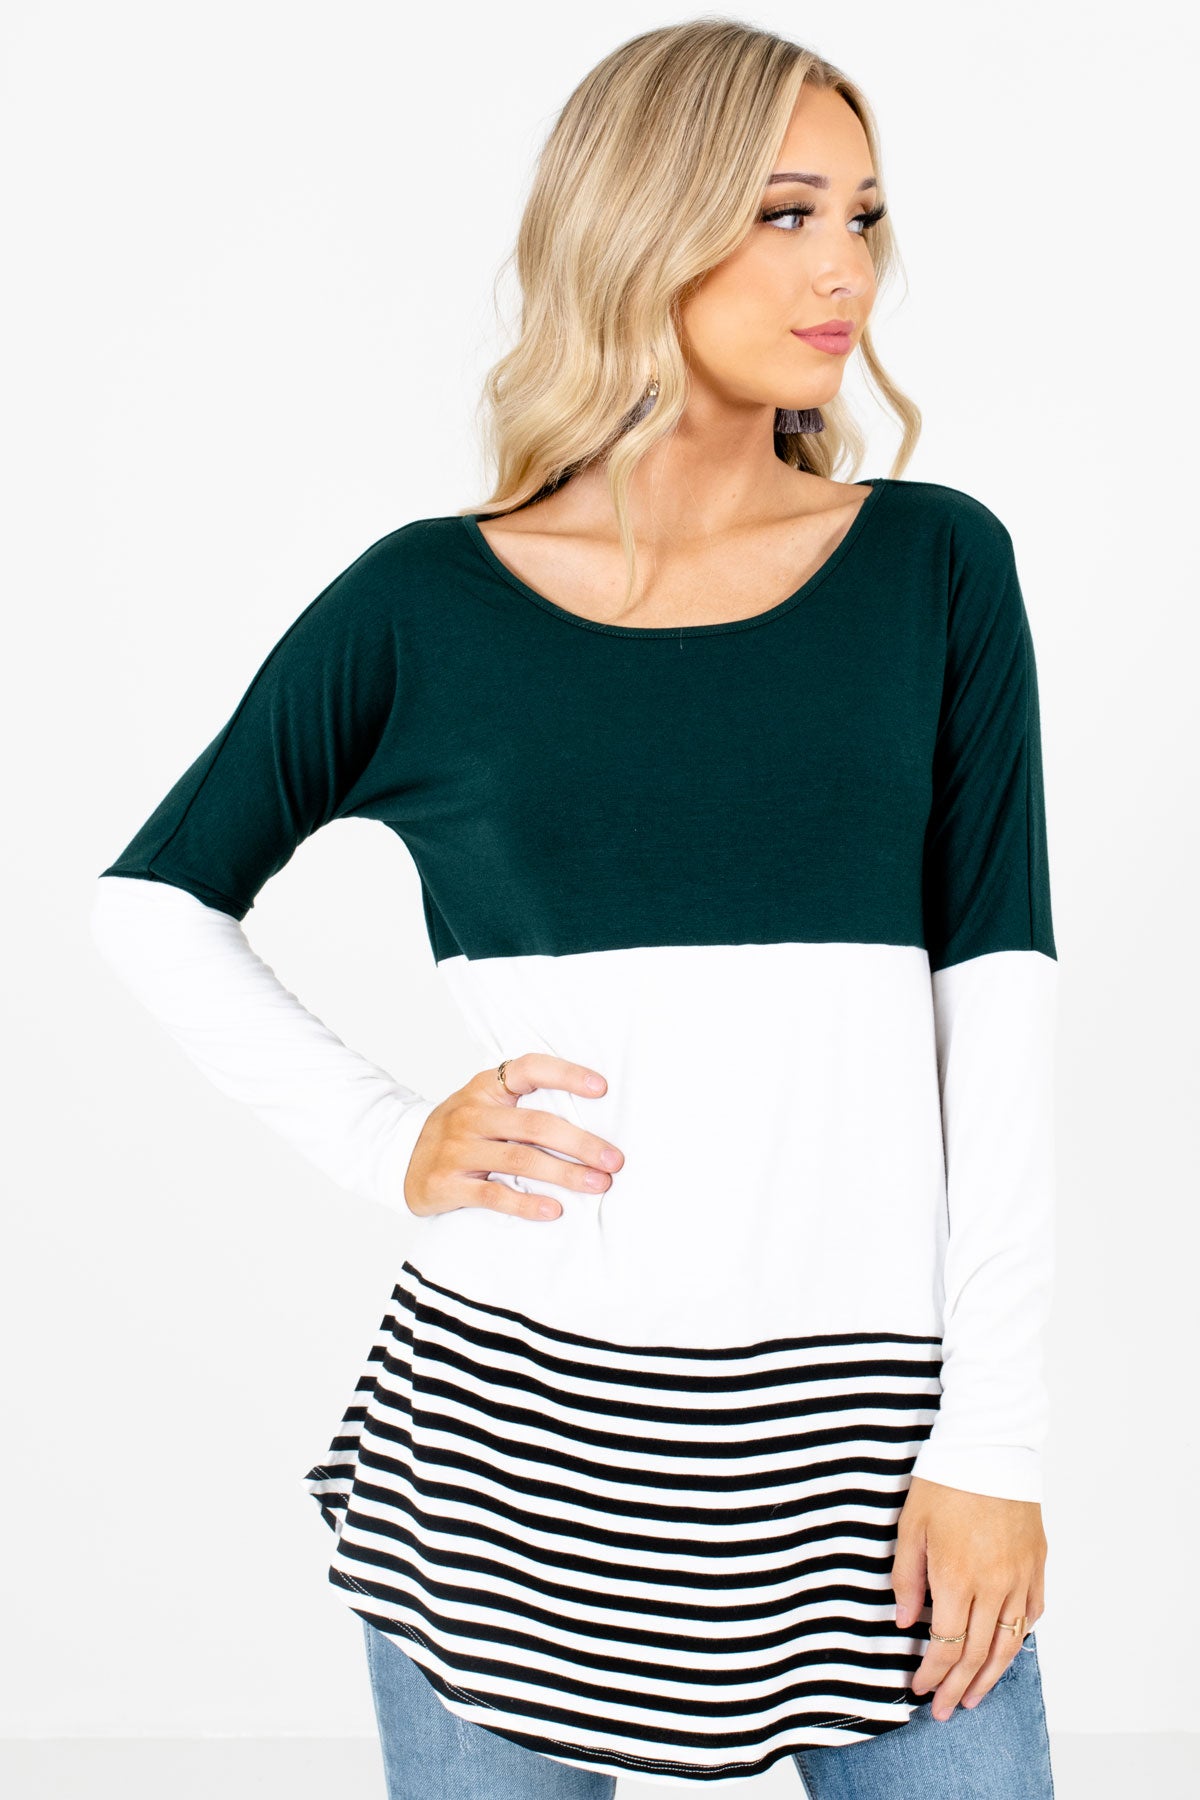 Women’s Teal Warm and Cozy Boutique Tops